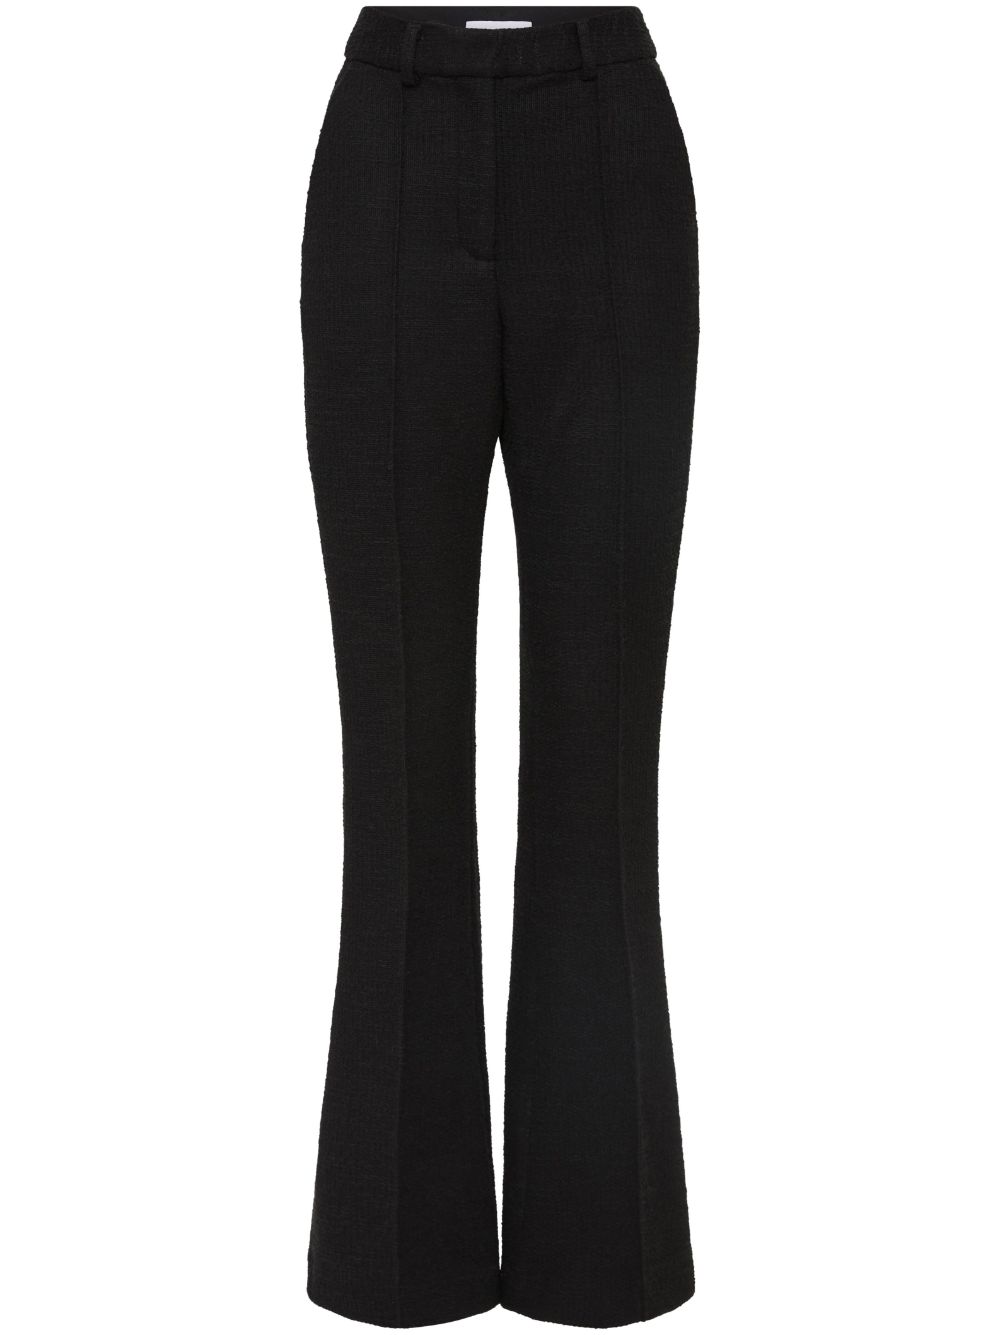 REBECCA VALLANCE CARINE TWEED TAILORED TROUSERS